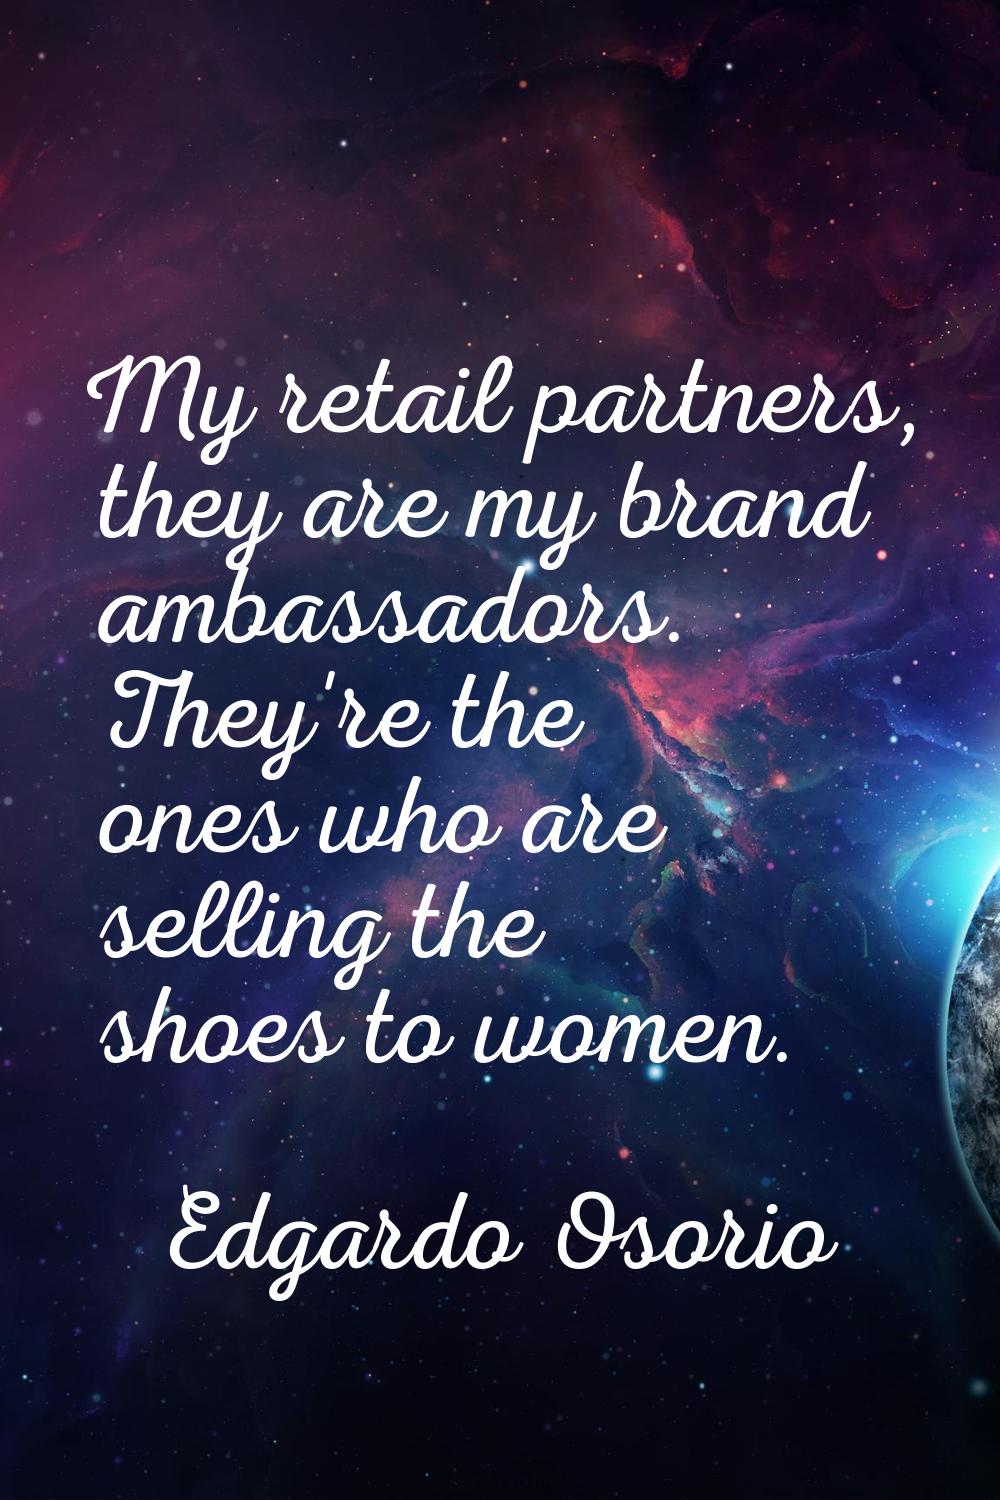 My retail partners, they are my brand ambassadors. They're the ones who are selling the shoes to wo